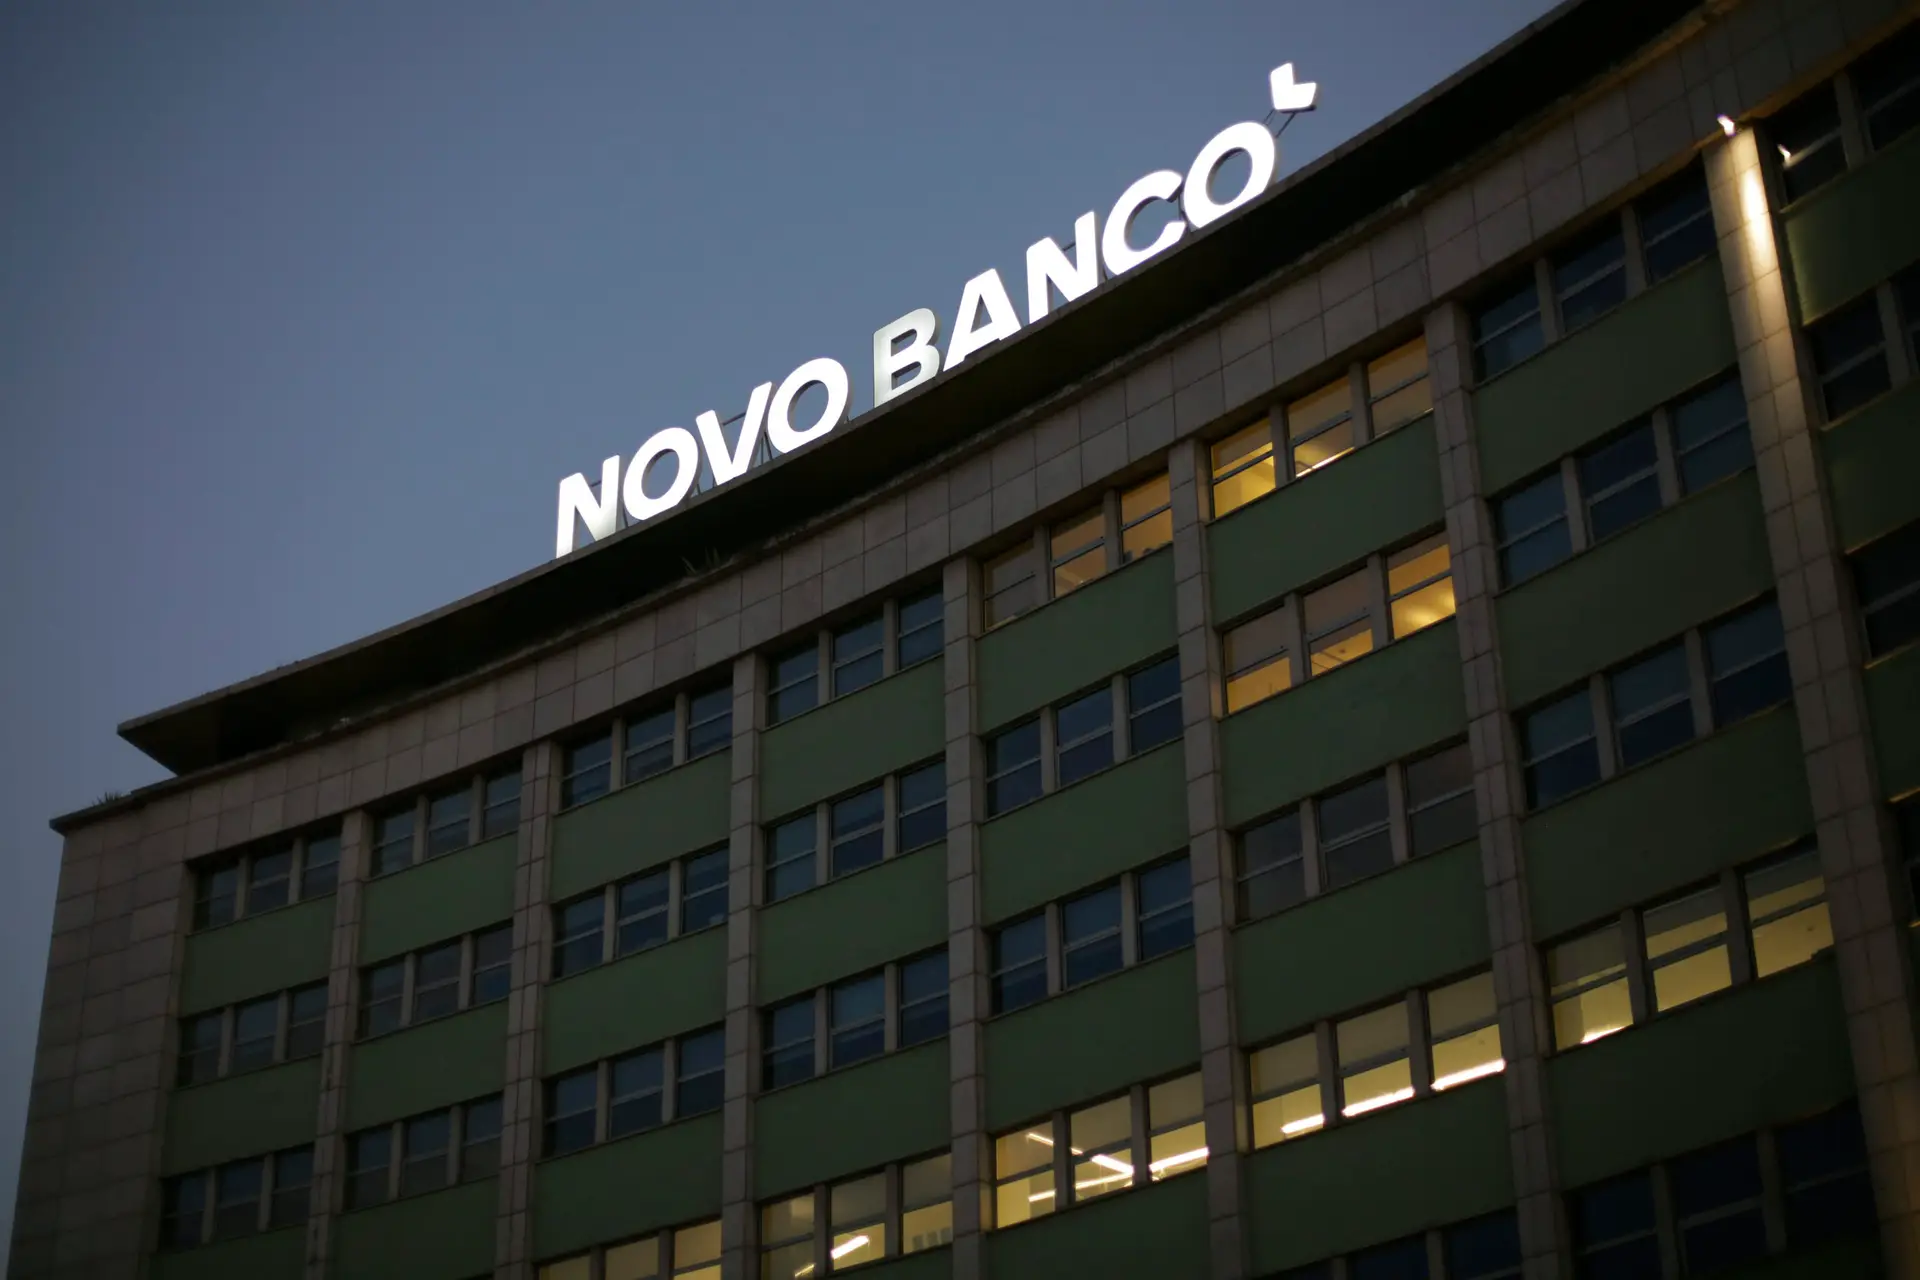 The logo of the Novo Banco bank is lit on the roof of one of their buildings in Lisbon, Thursday, Sept. 3, 2020. (AP Photo/Armando Franca)